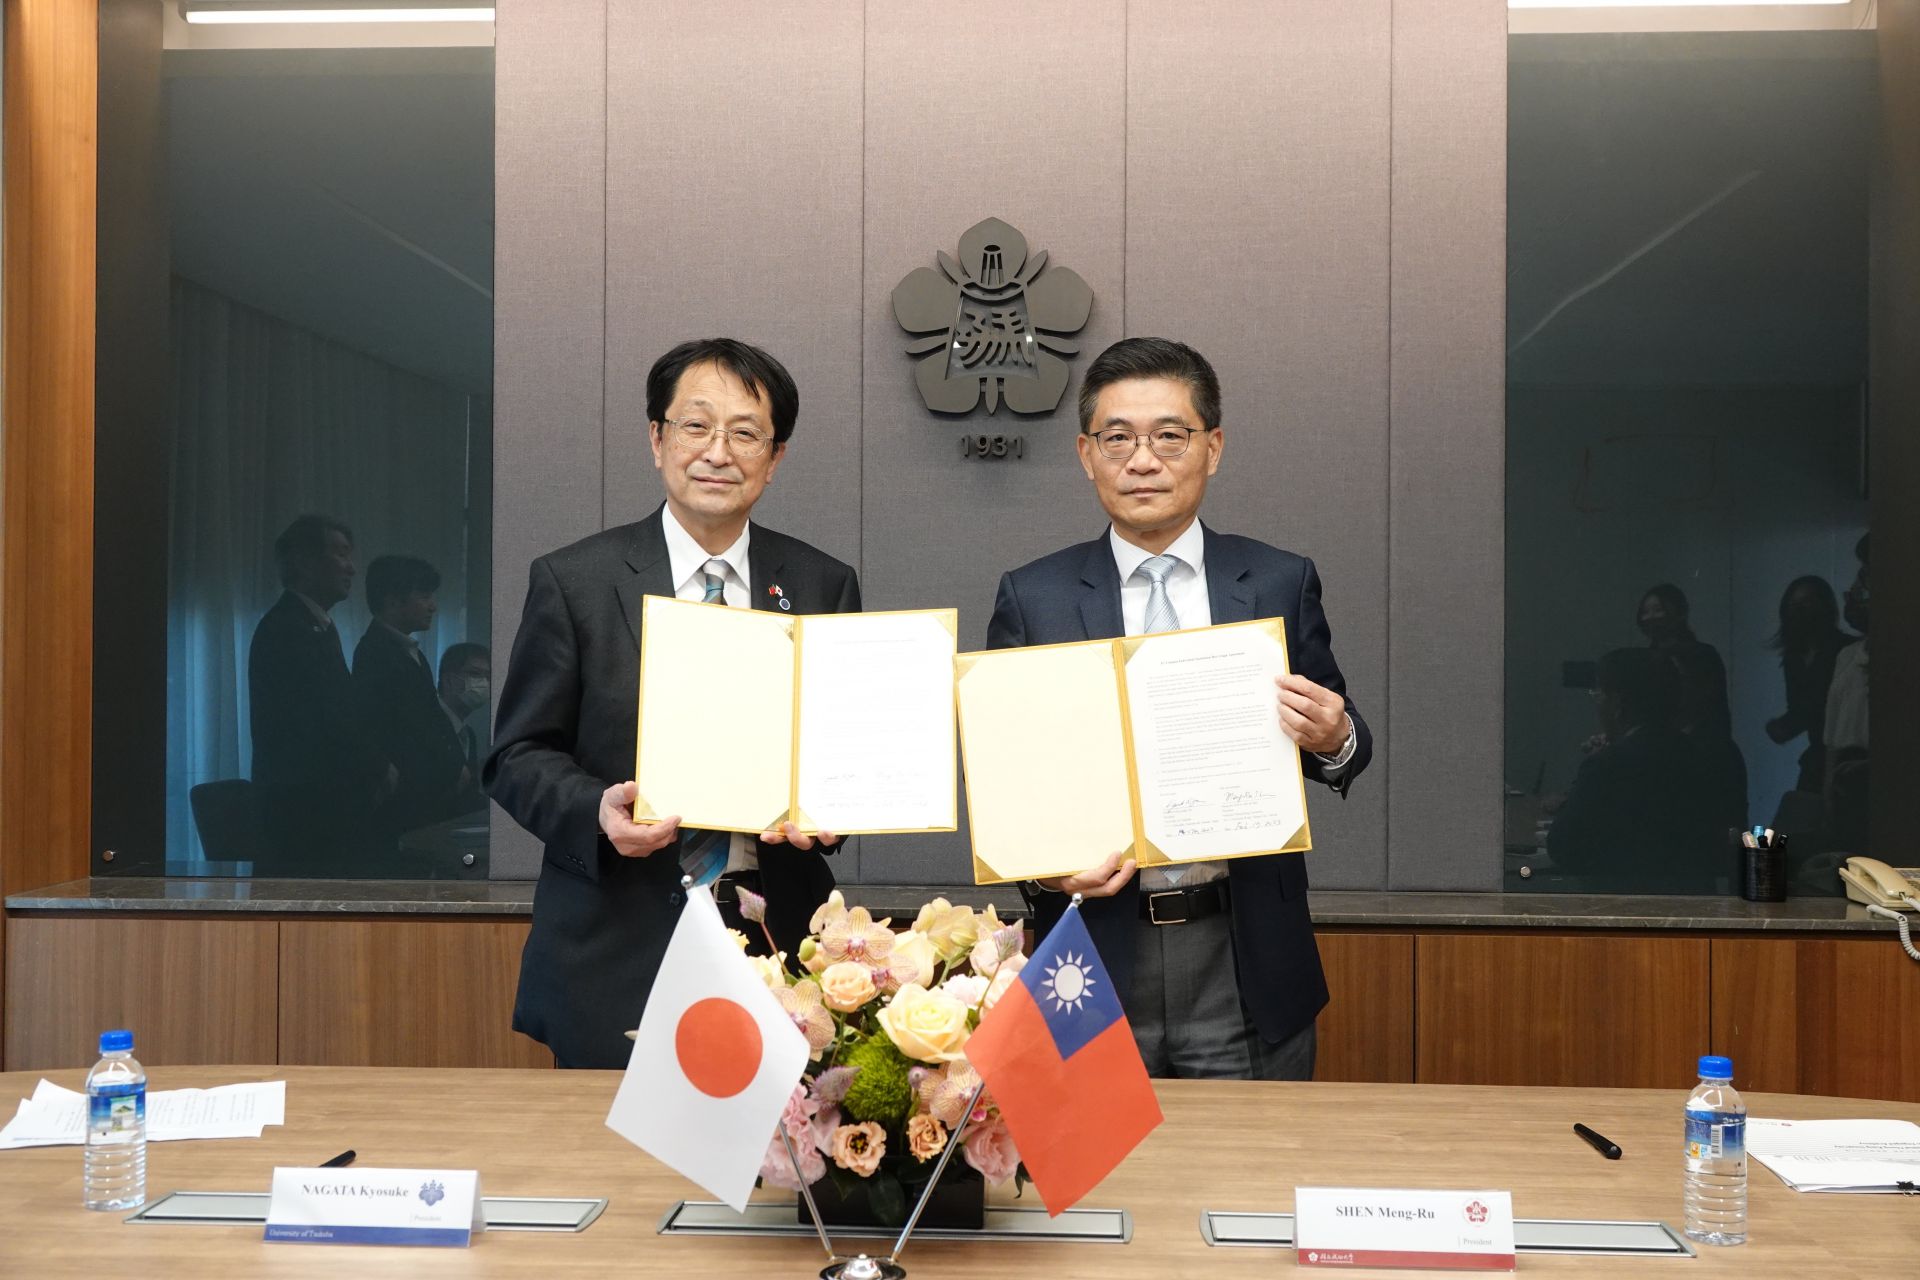 President of University of Tsukuba Visits NCKU and Signs JV Campus Program to Accelerate the Sharing of Higher Education Online